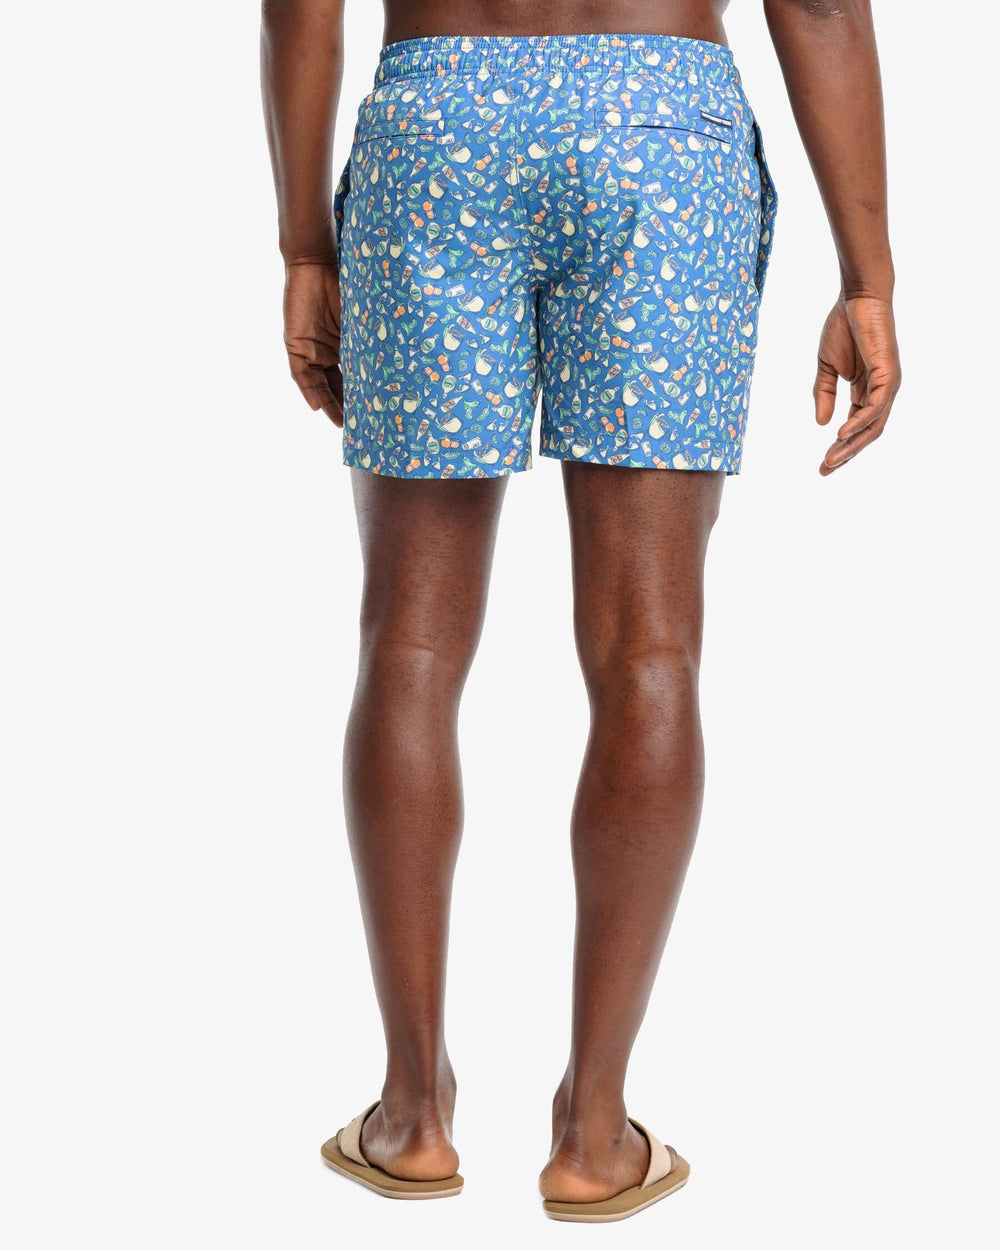 The back view of the Southern Tide Marg Madness Printed Swim Trunk by Southern Tide - Atlantic Blue